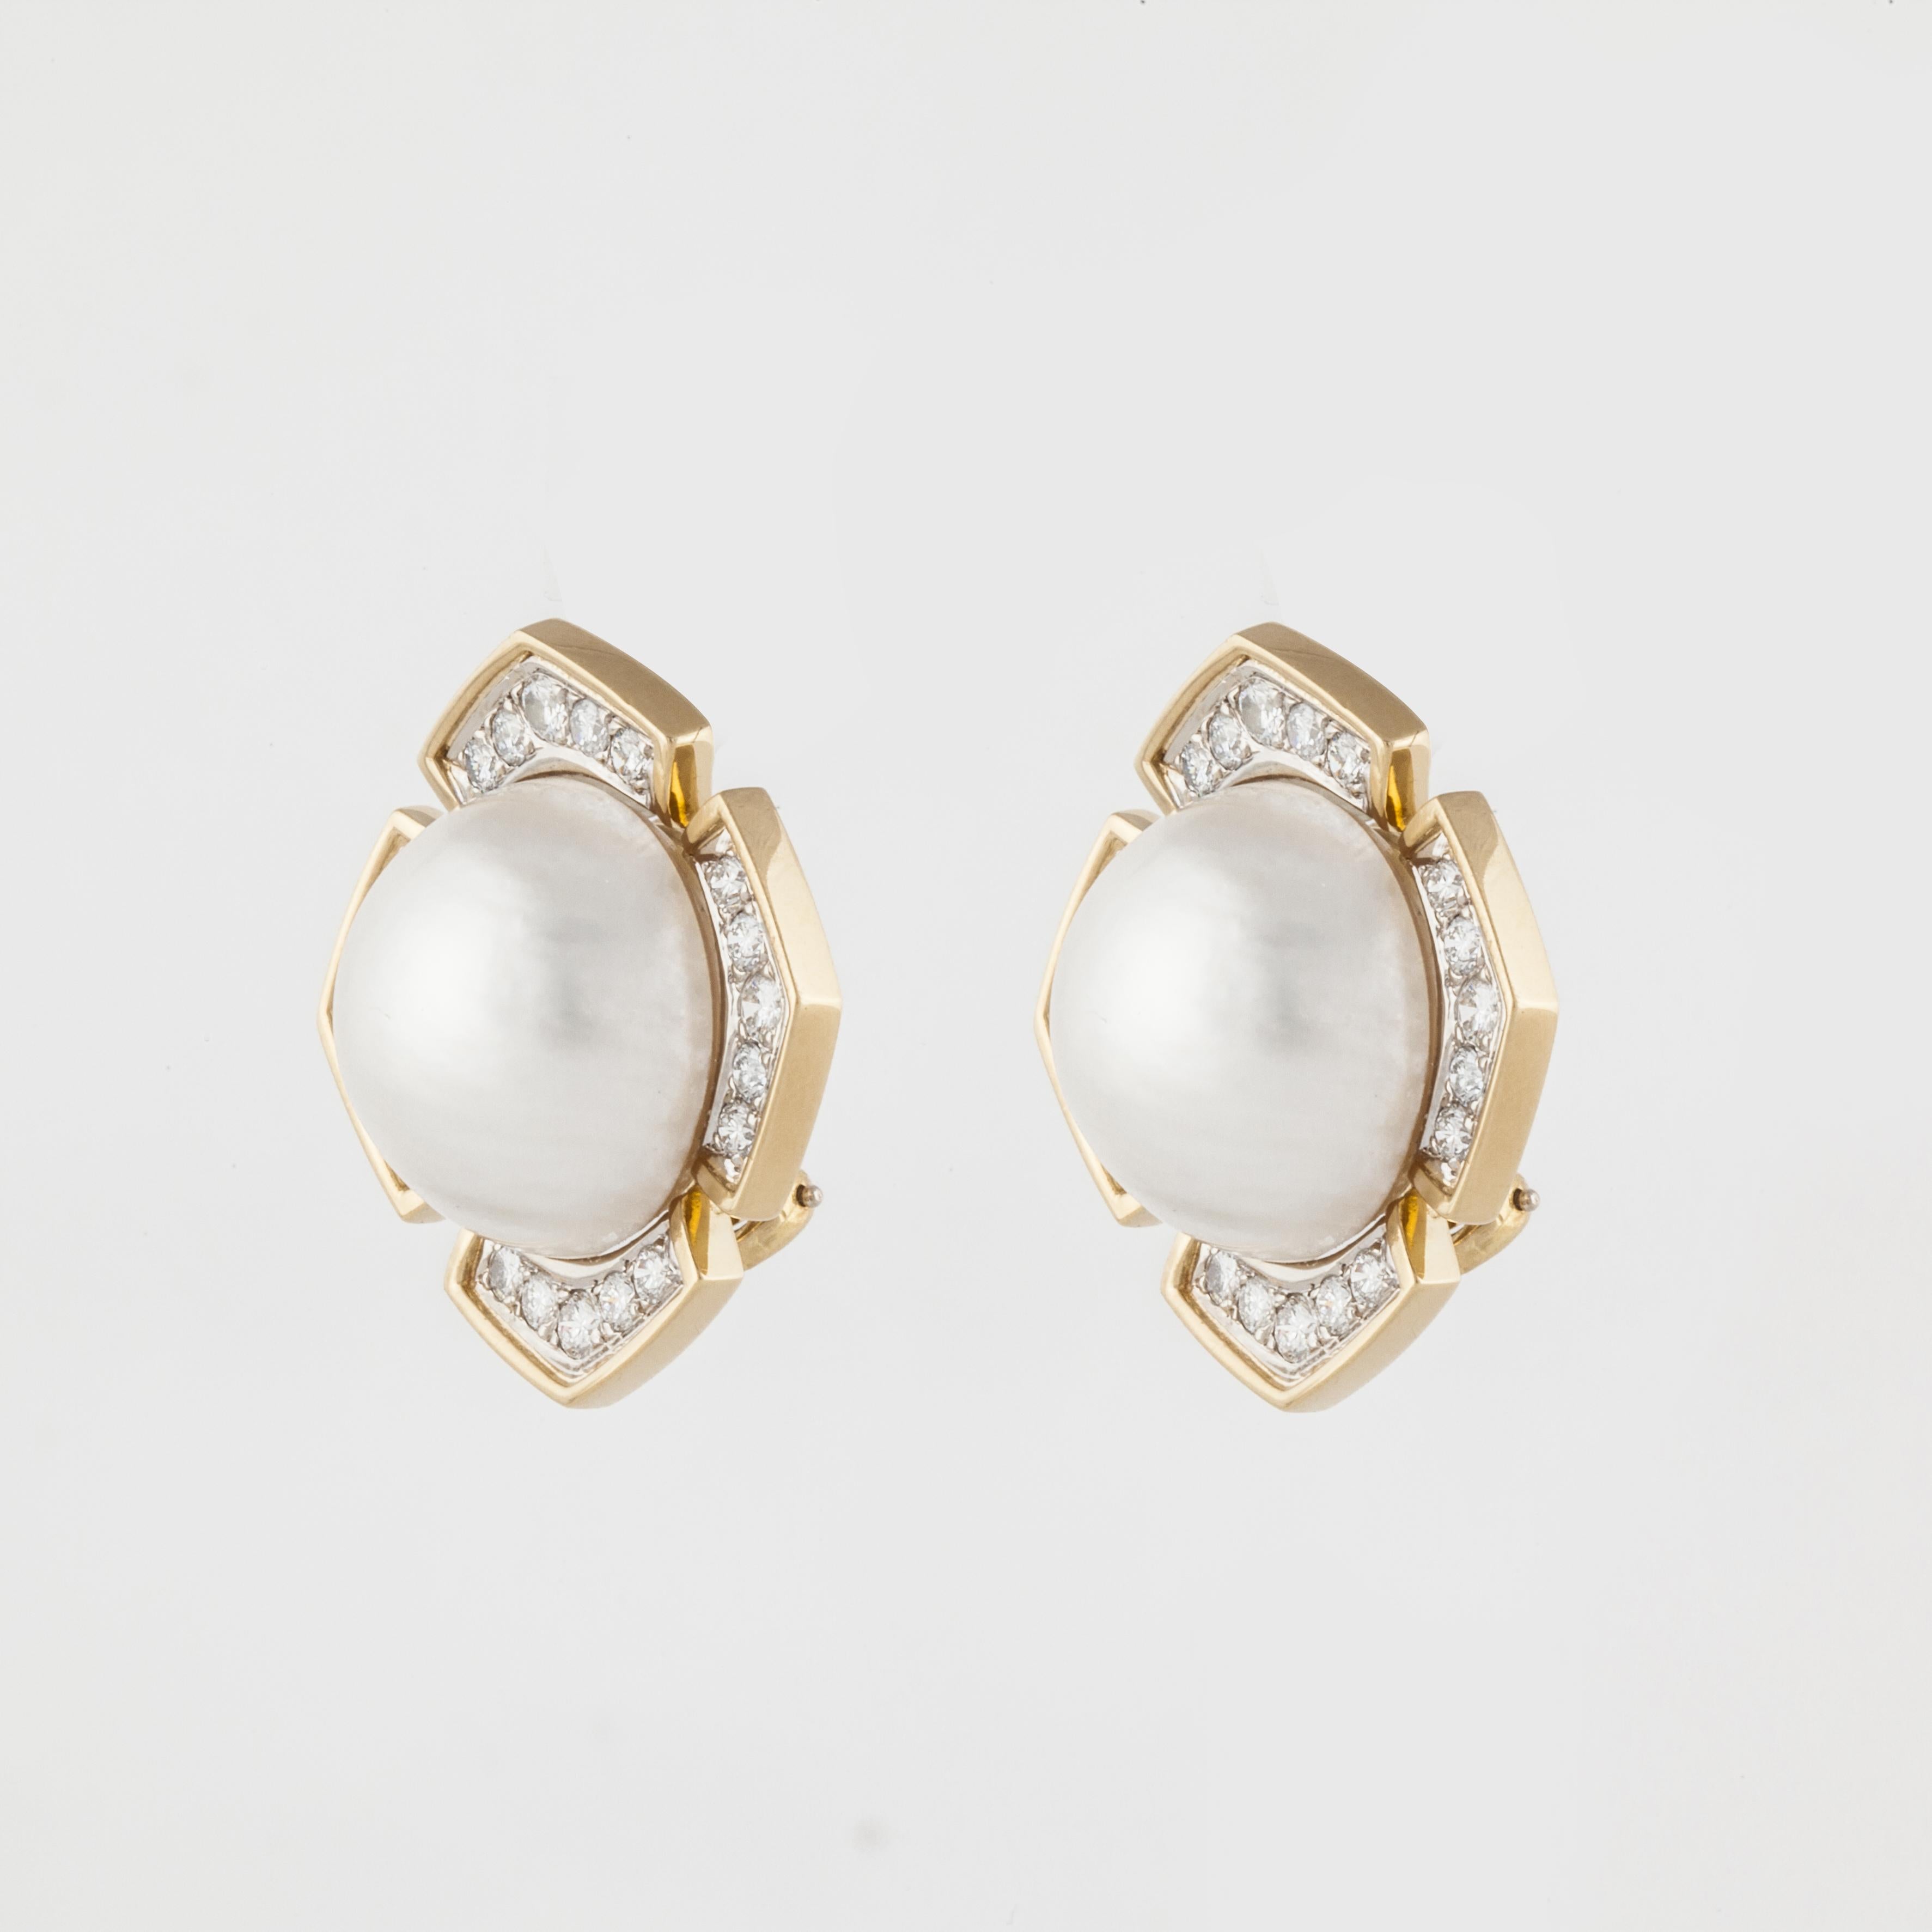 18K yellow gold earrings featuring mabé pearls accented by round diamonds.  The pearls measuring 17-17.5mm.  There are 40 round diamonds weighing 2.10 carats; G-H color and VS1-VS2 clarity.  Measure 1 1/8 inches across.  These are clip style